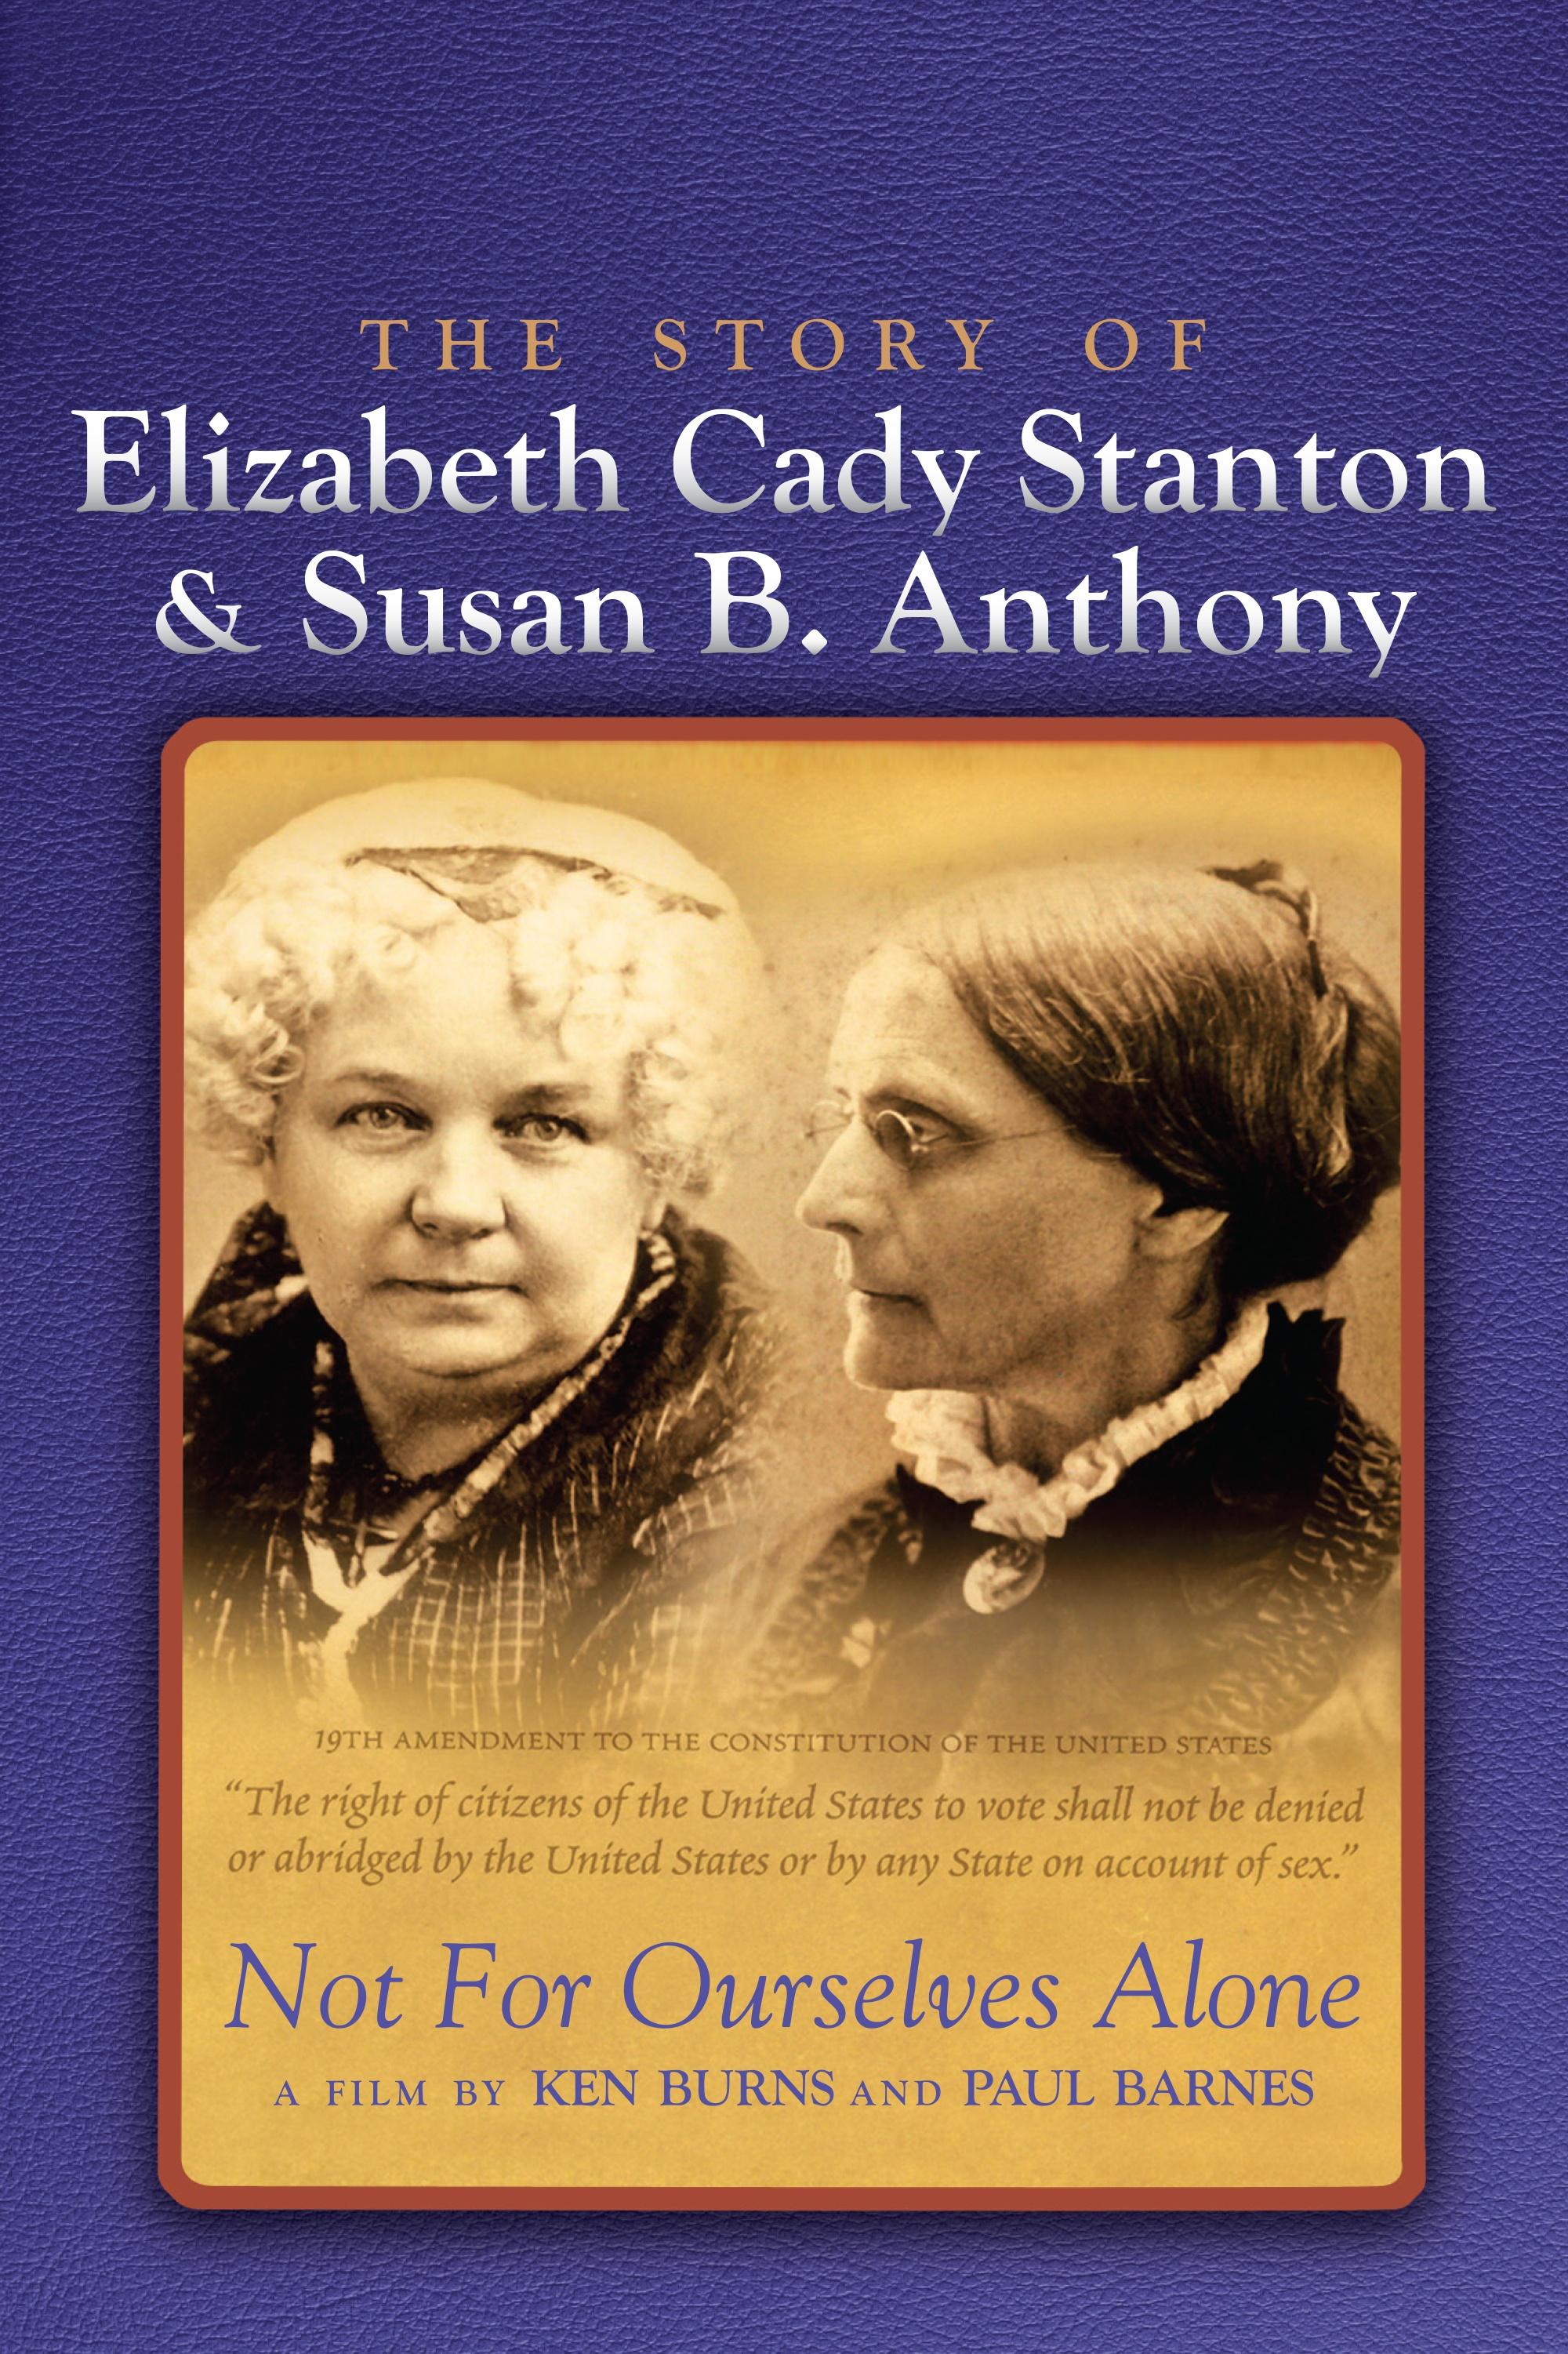 Not For Ourselves Alone: The Story of Elizabeth Cady Stanton and Susan B. Anthony show's poster